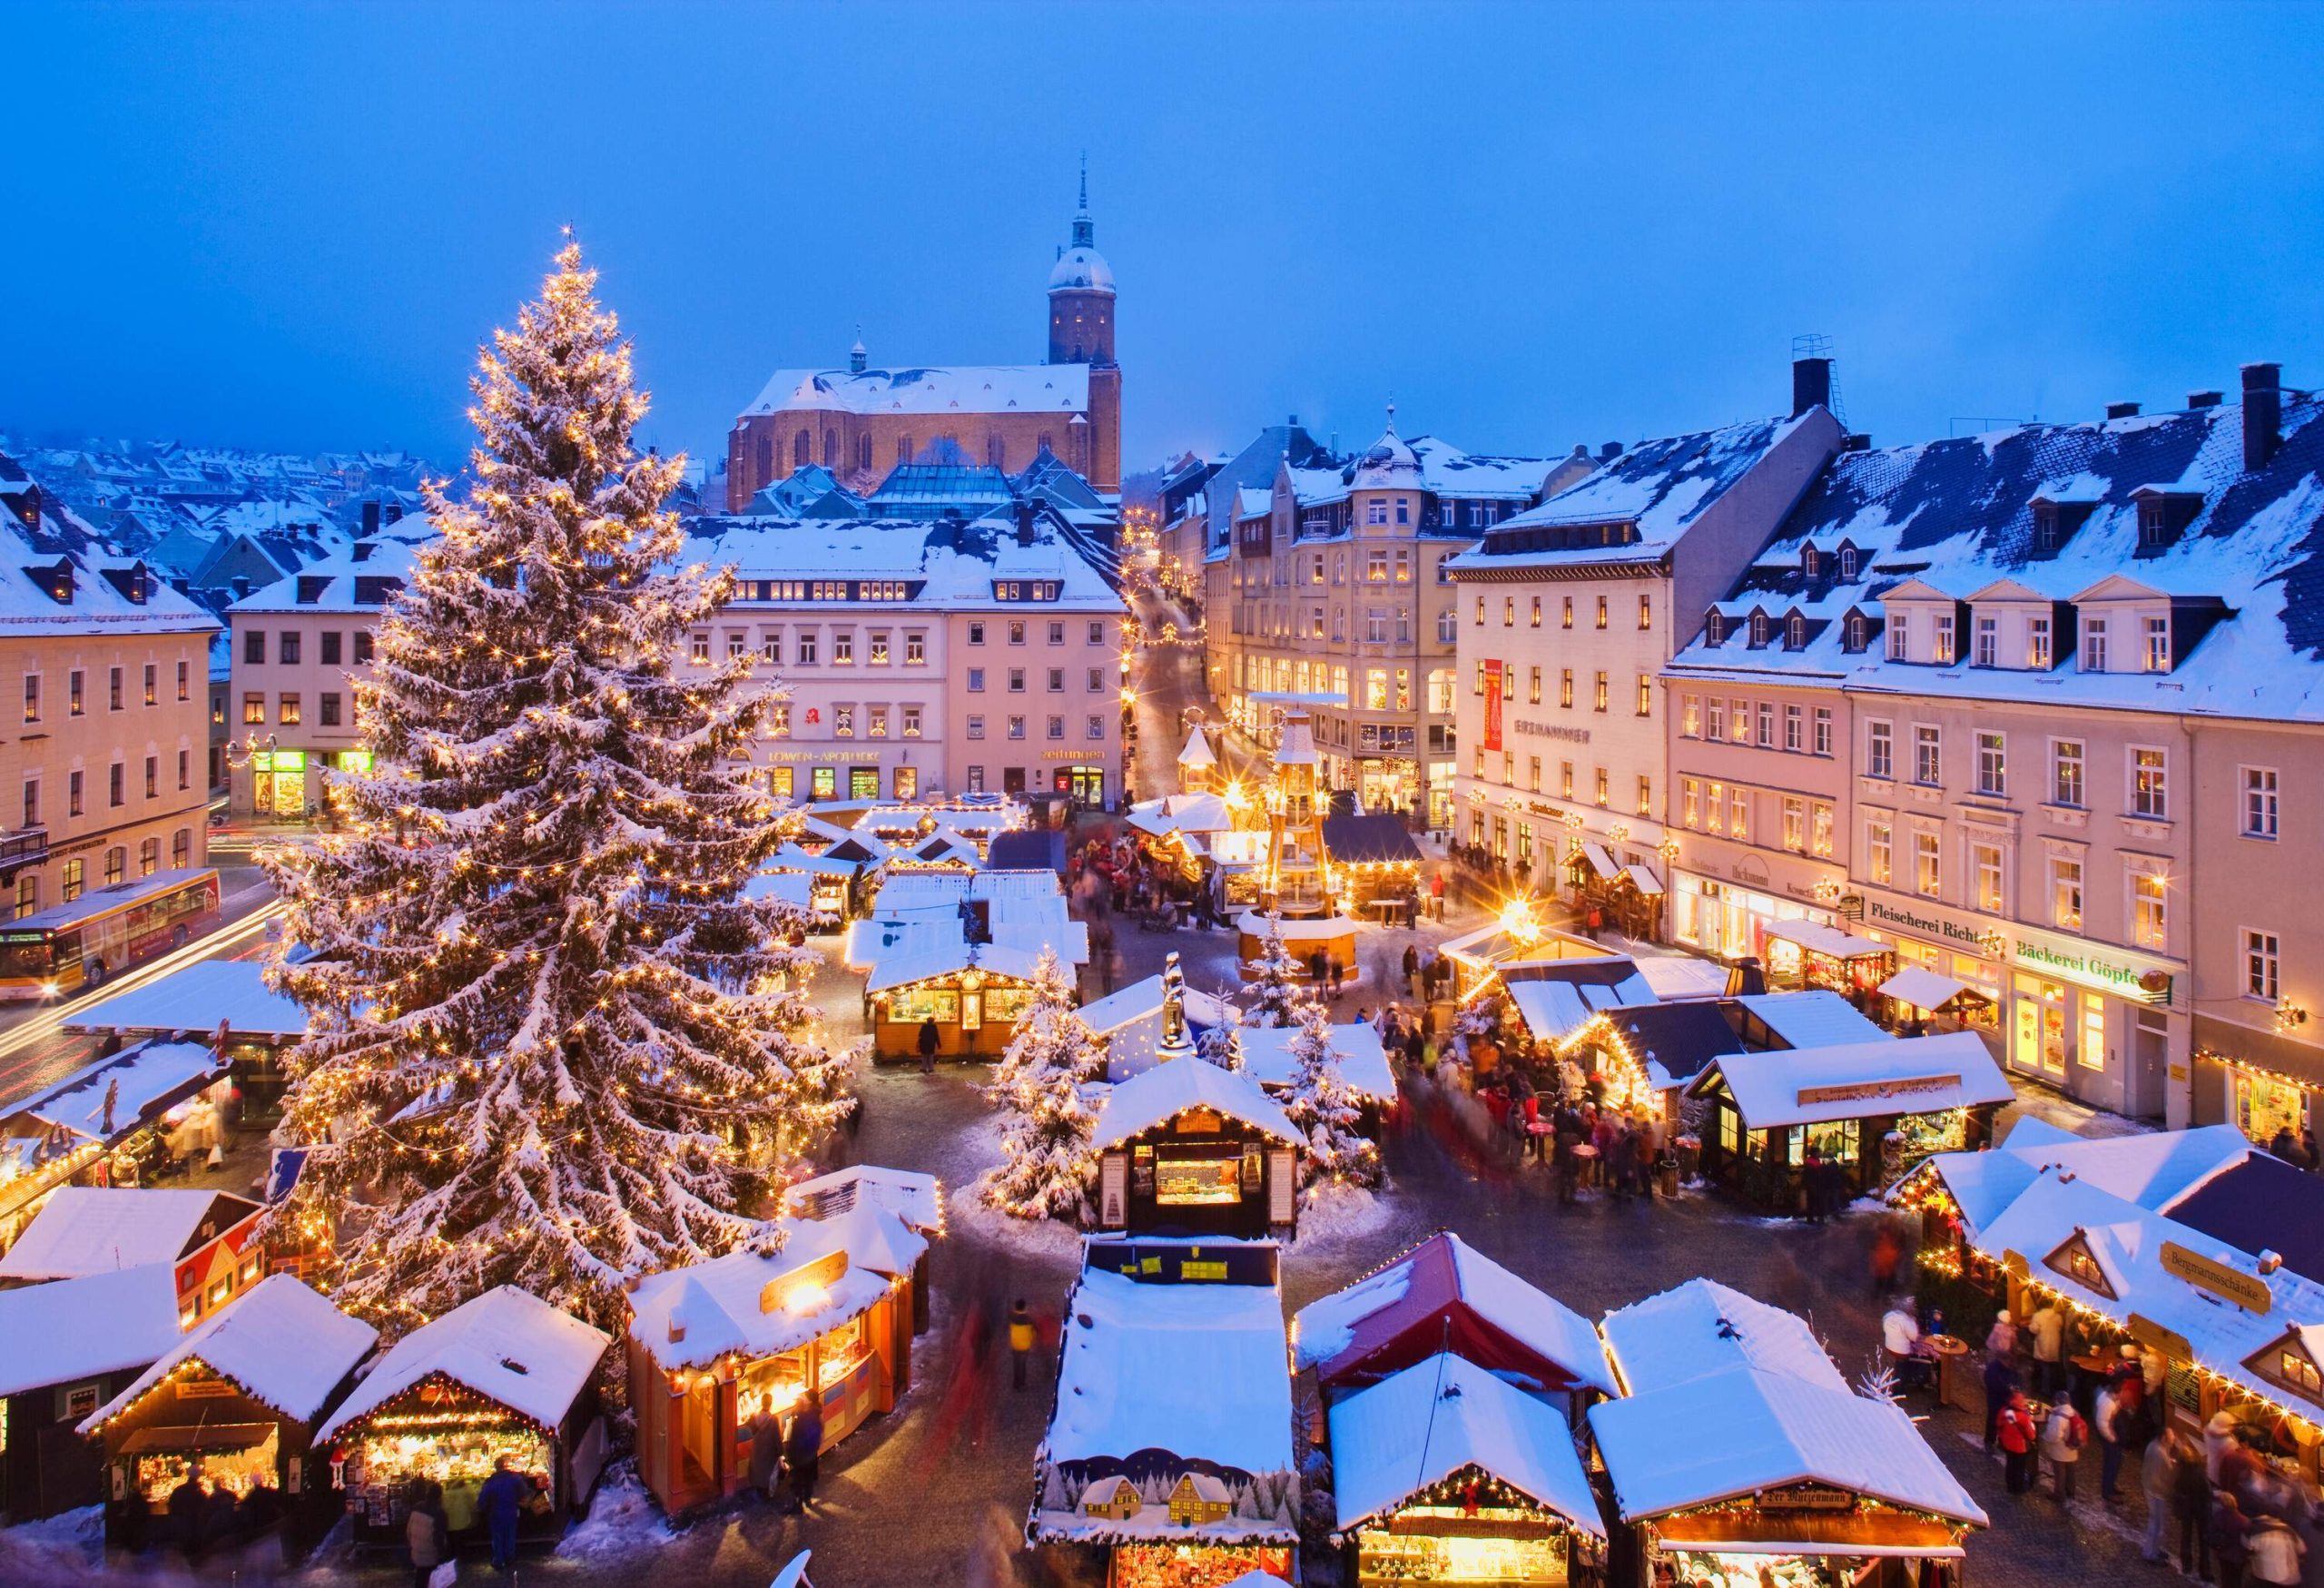 A busy Christmas market with a large Christmas tree in the middle surrounded by city structures at night.